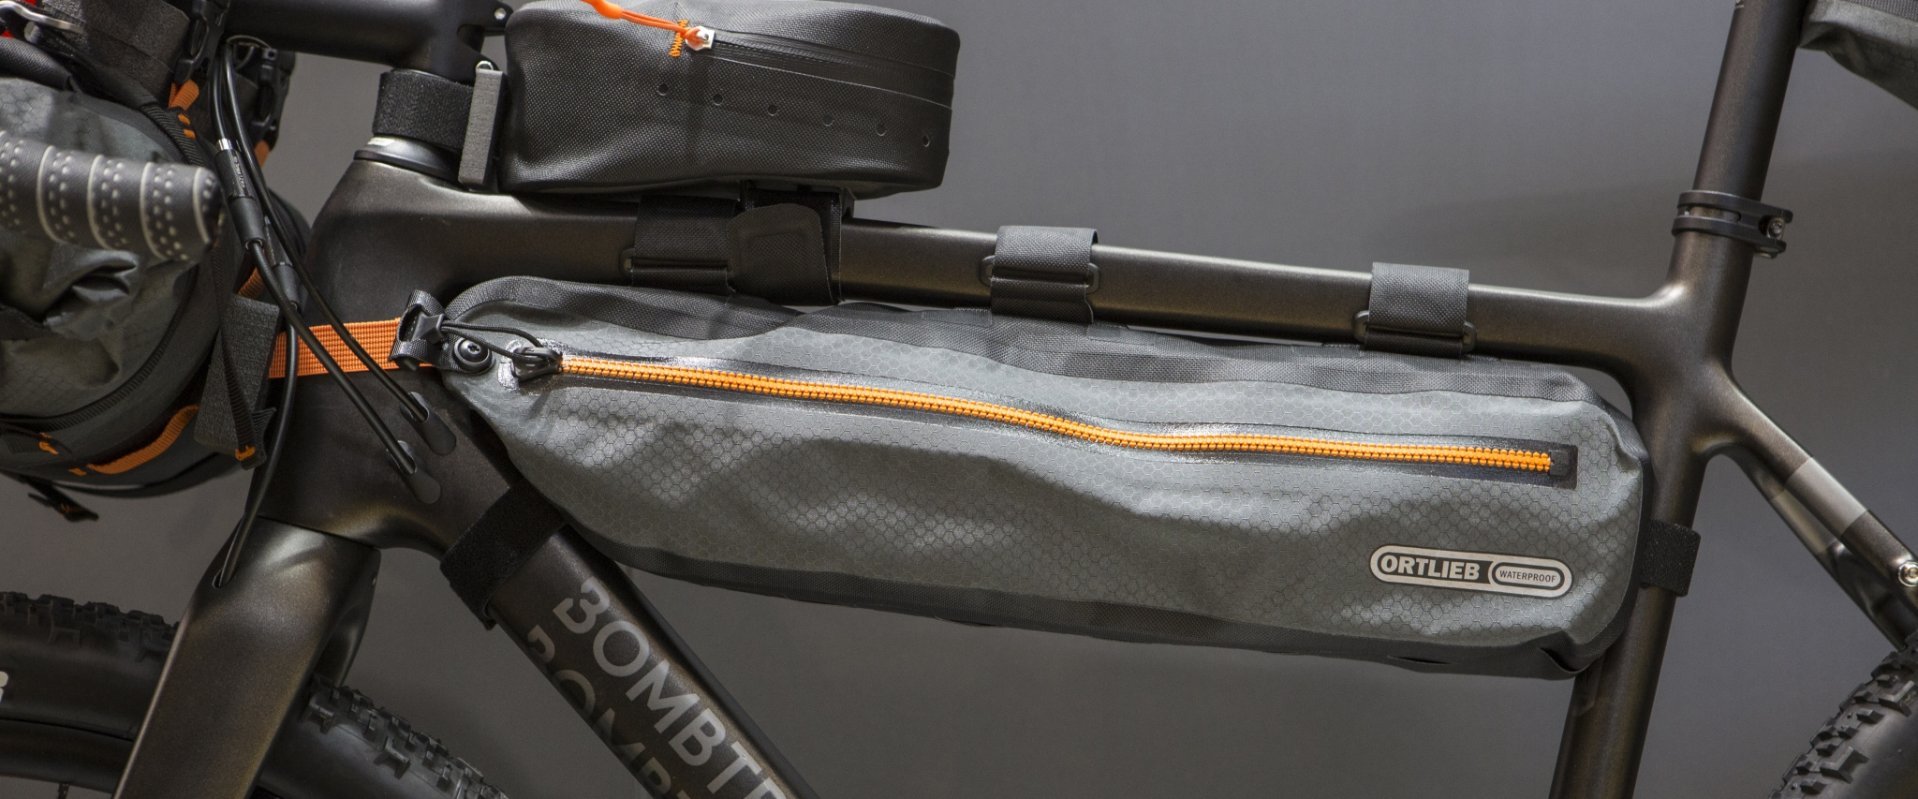 The Frame Pack is great for small, but heavy items like tools. 